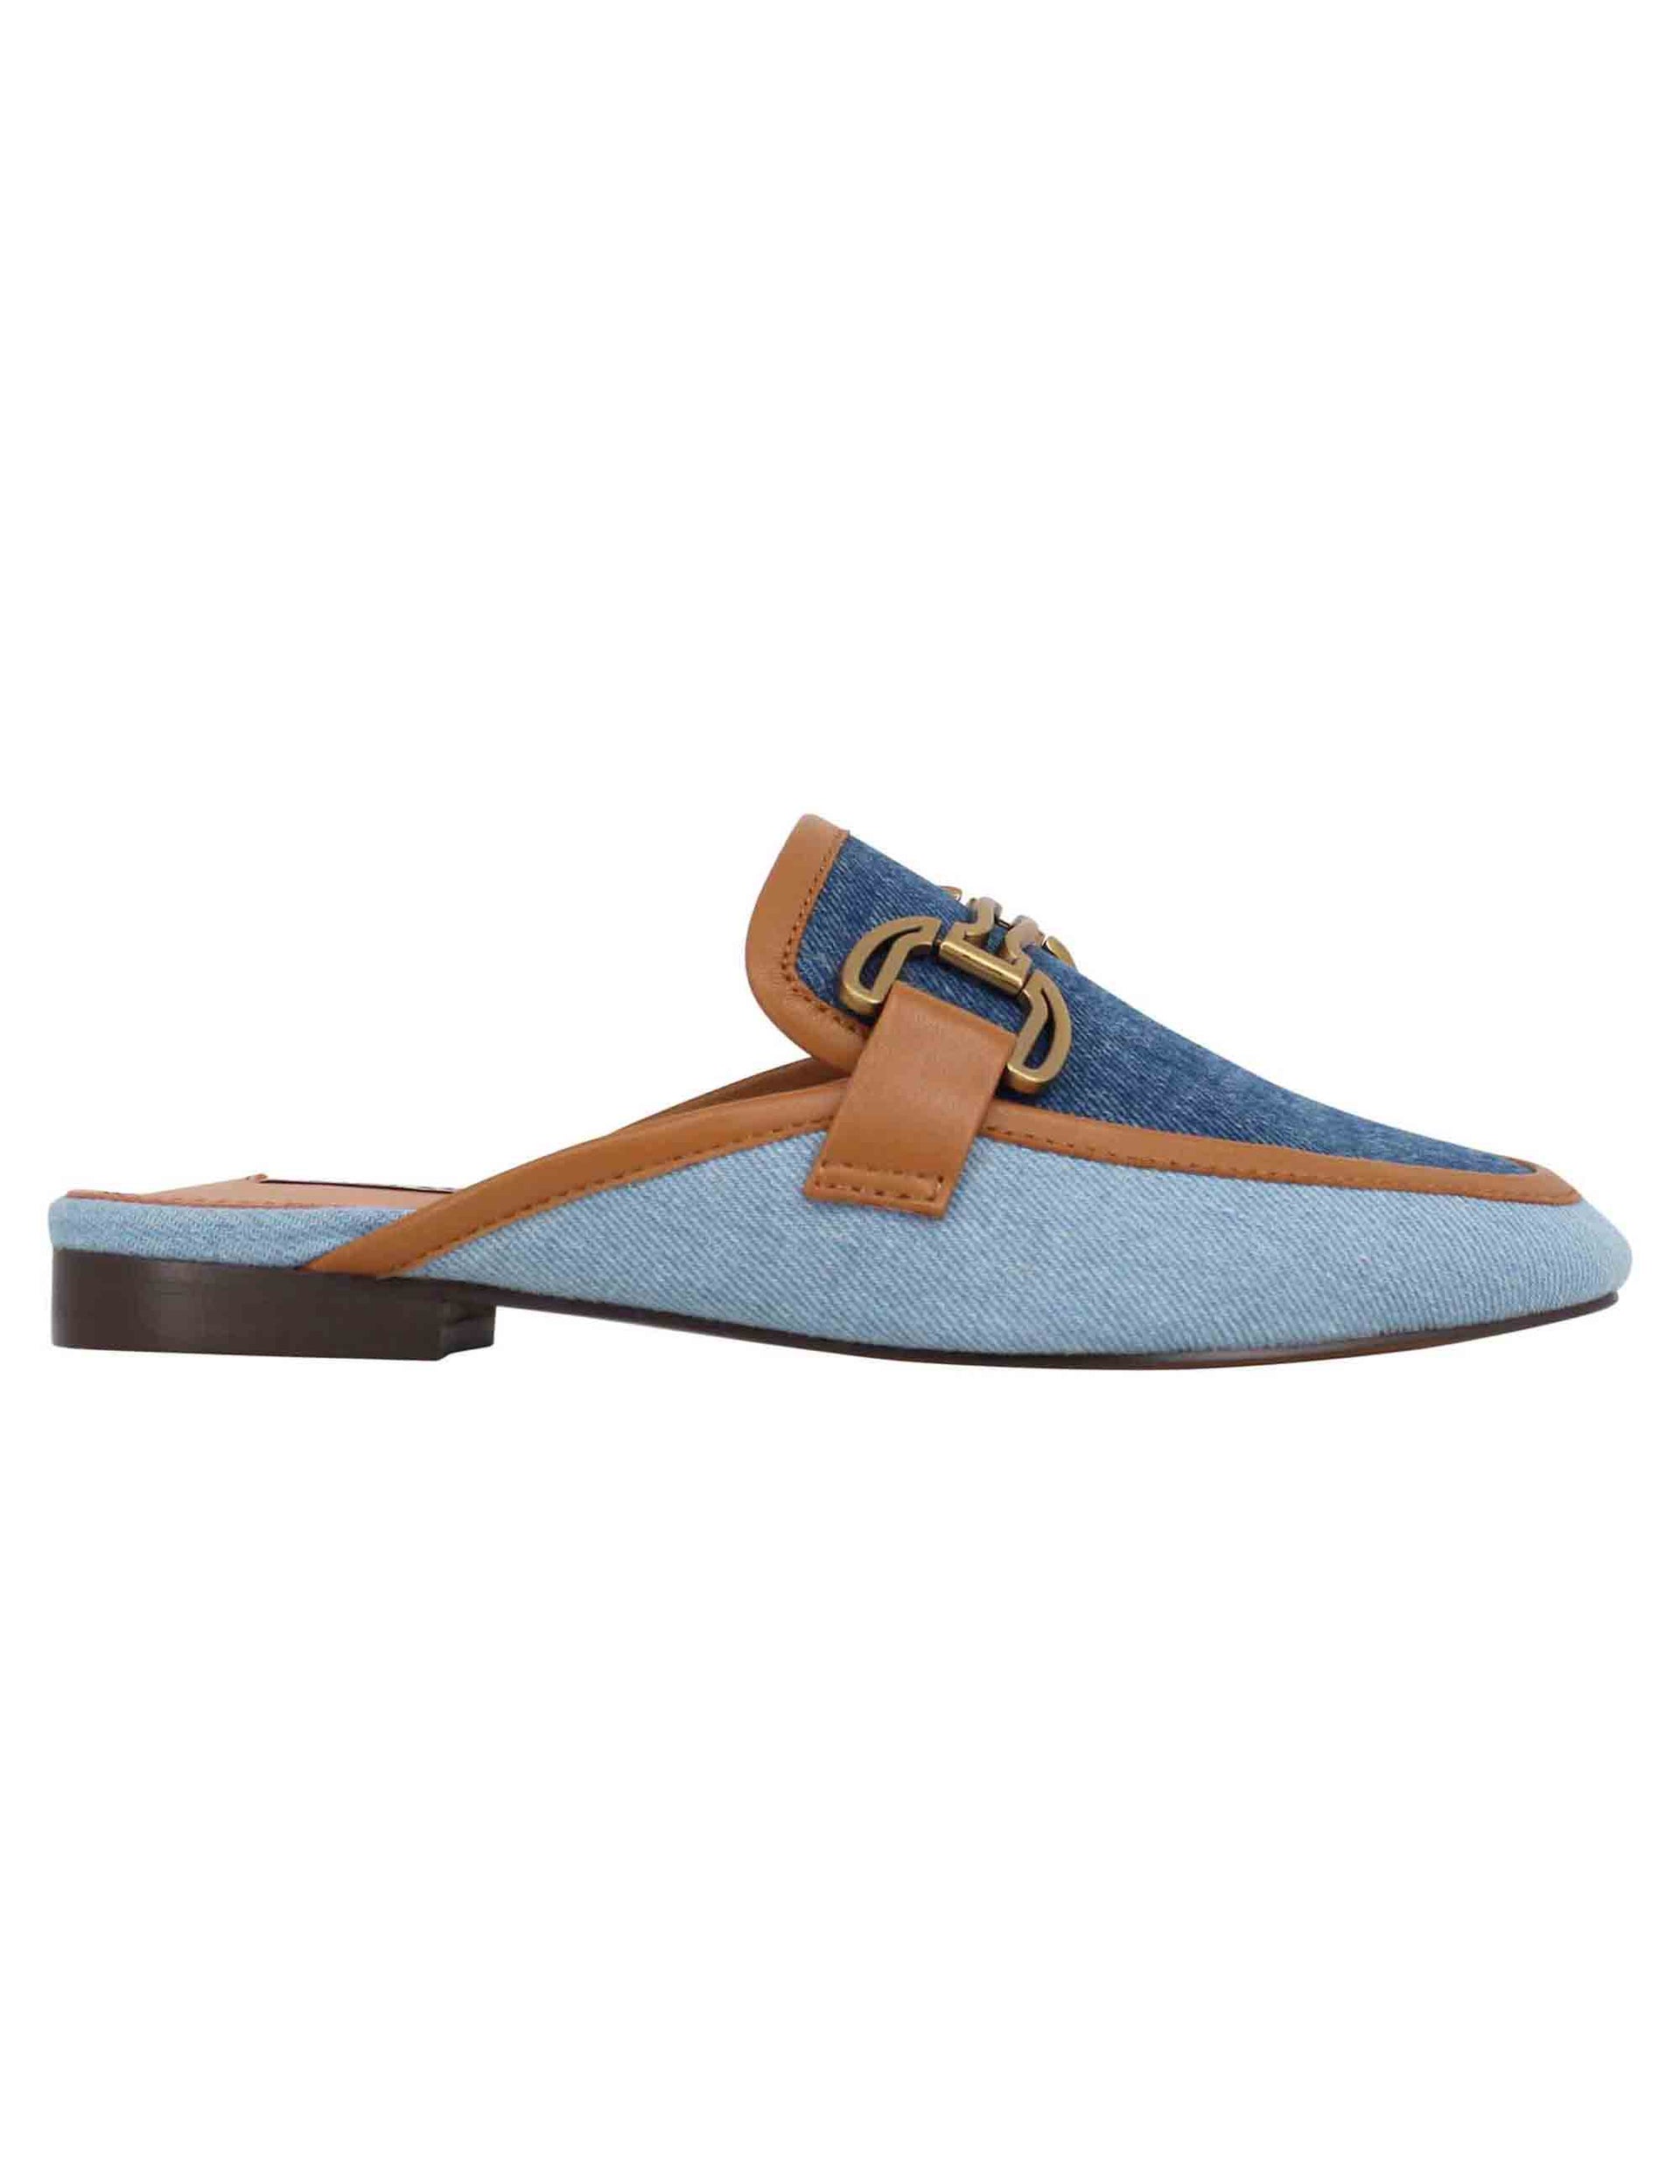 Women's sabot in blue canvas with burnished clamp and low Vela heel